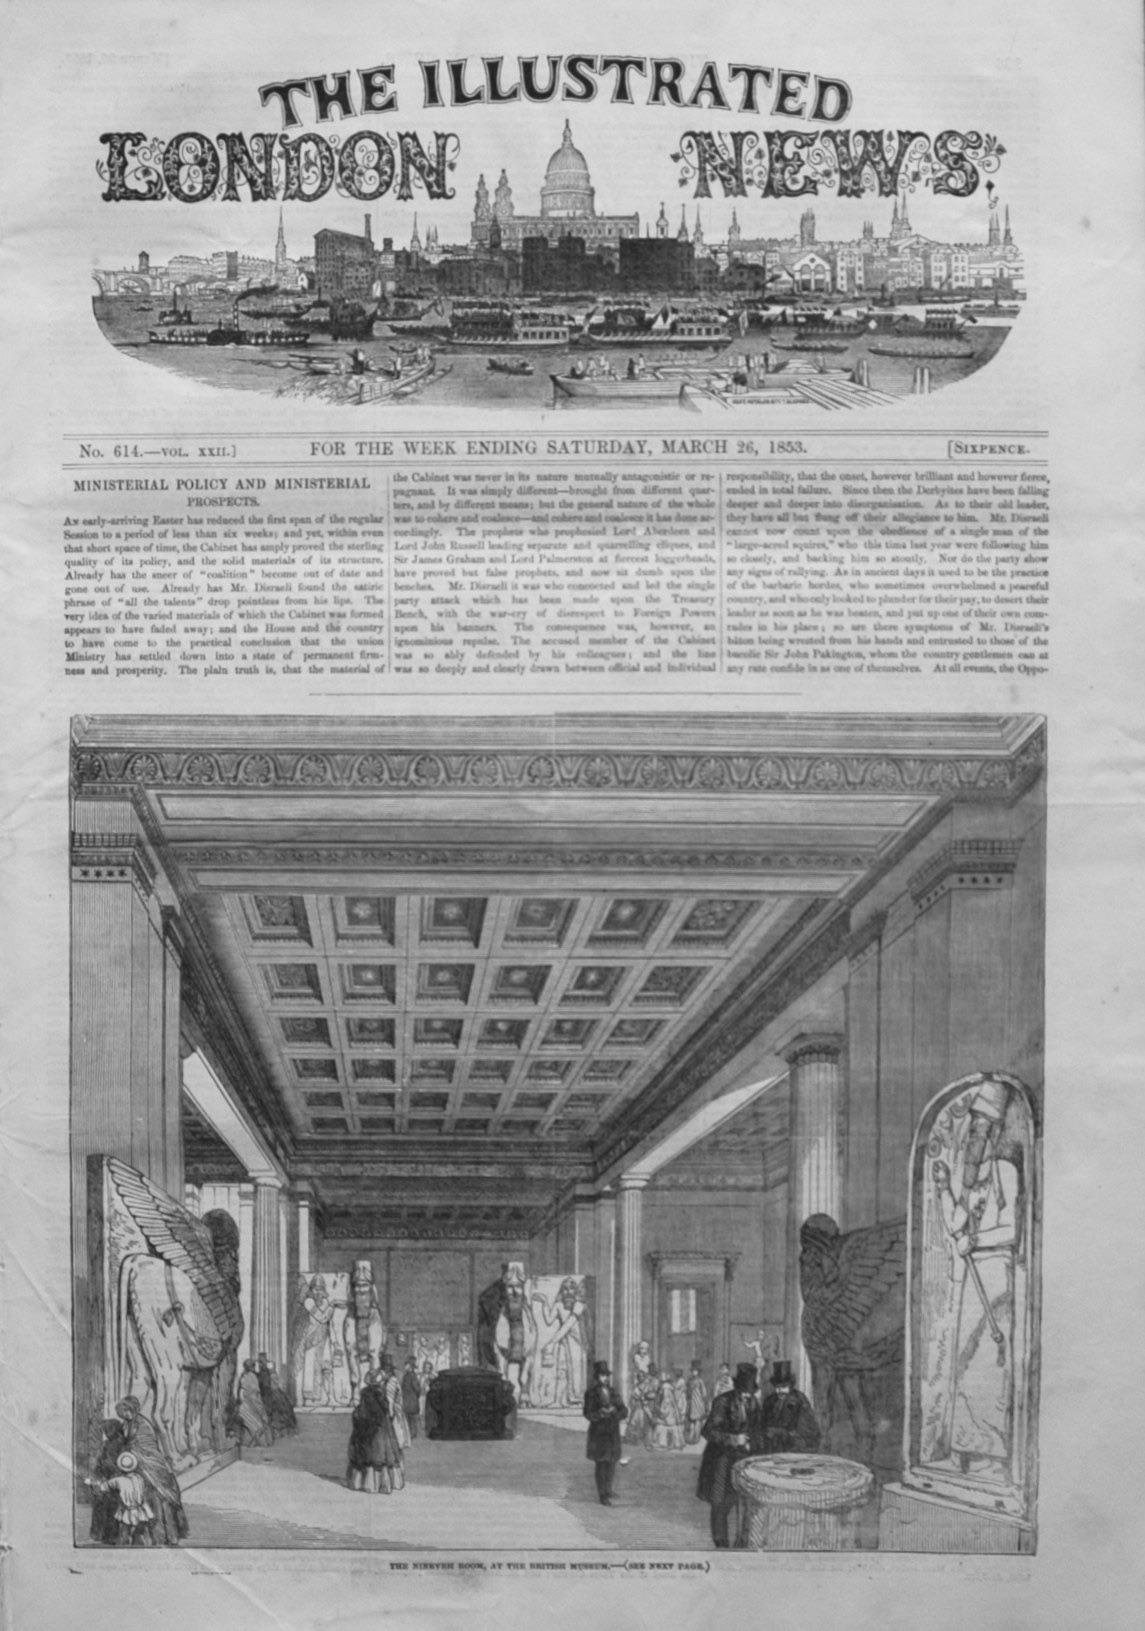 Illustrated London News, March 26th 1853.